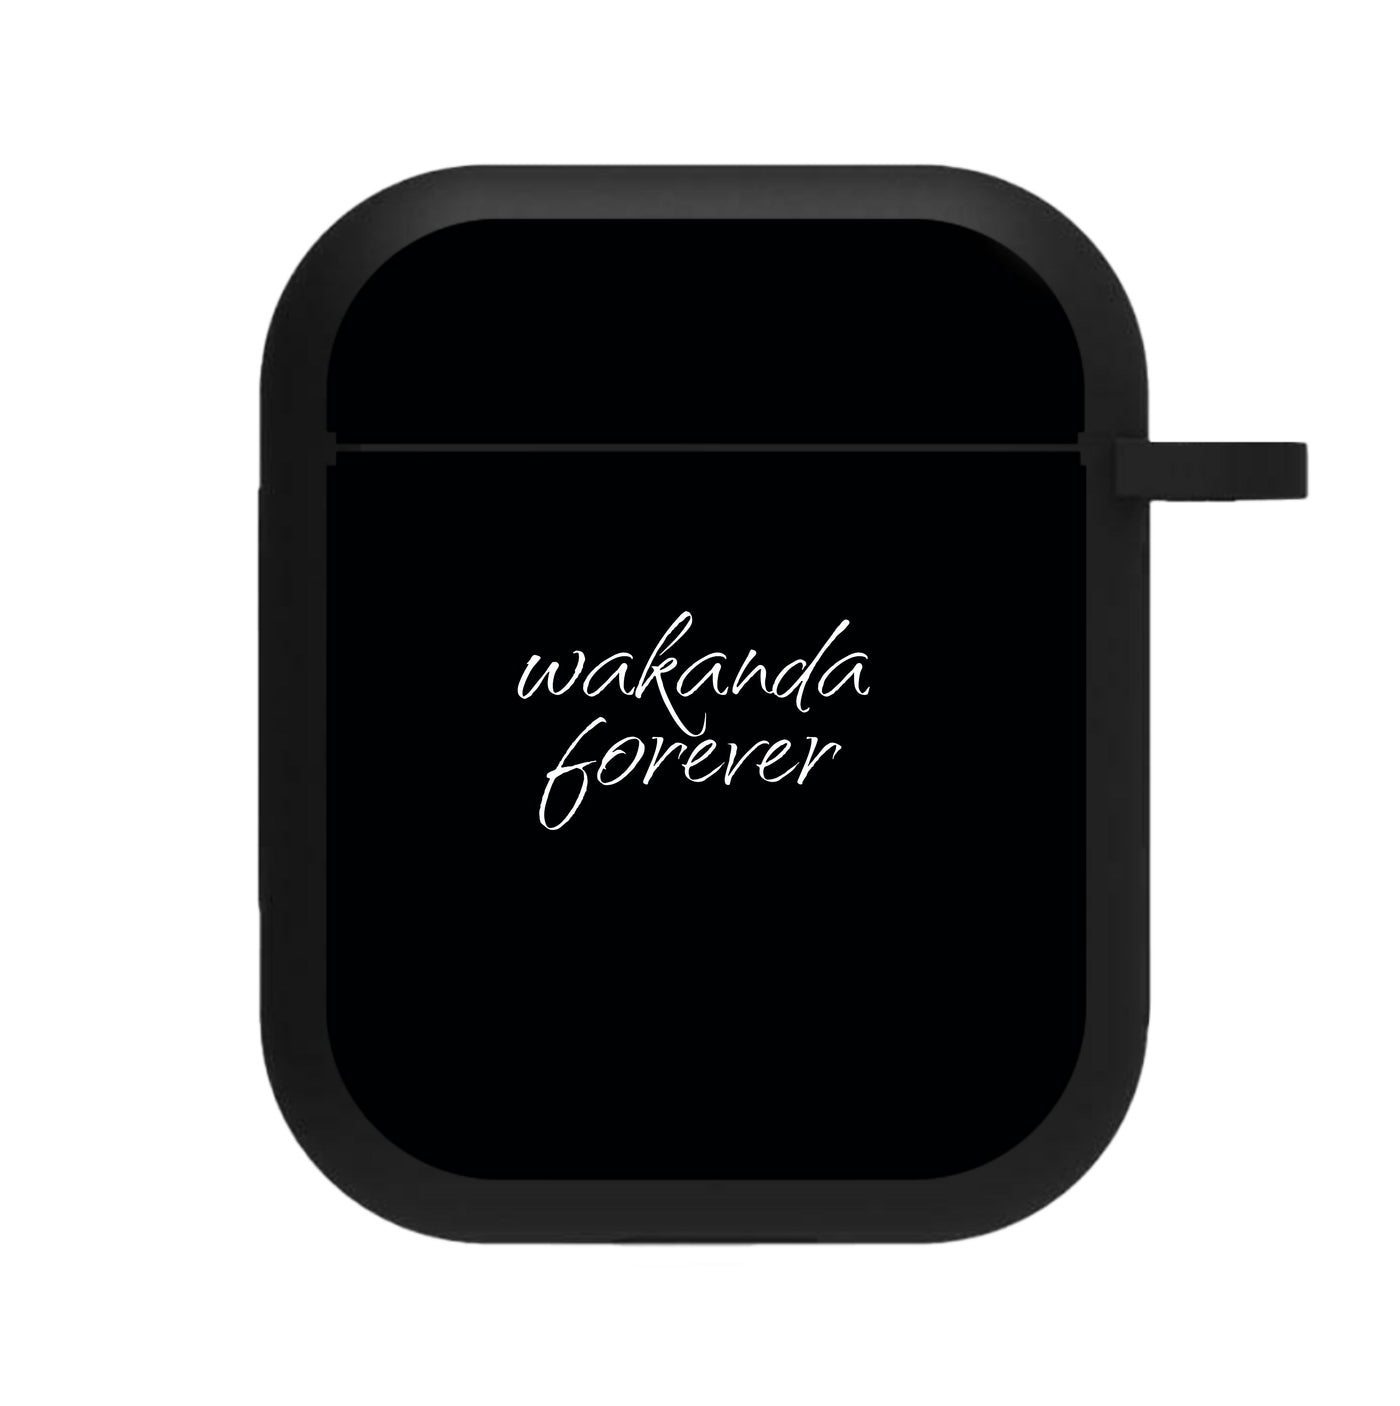 Wakanda Forever - Black Panther AirPods Case